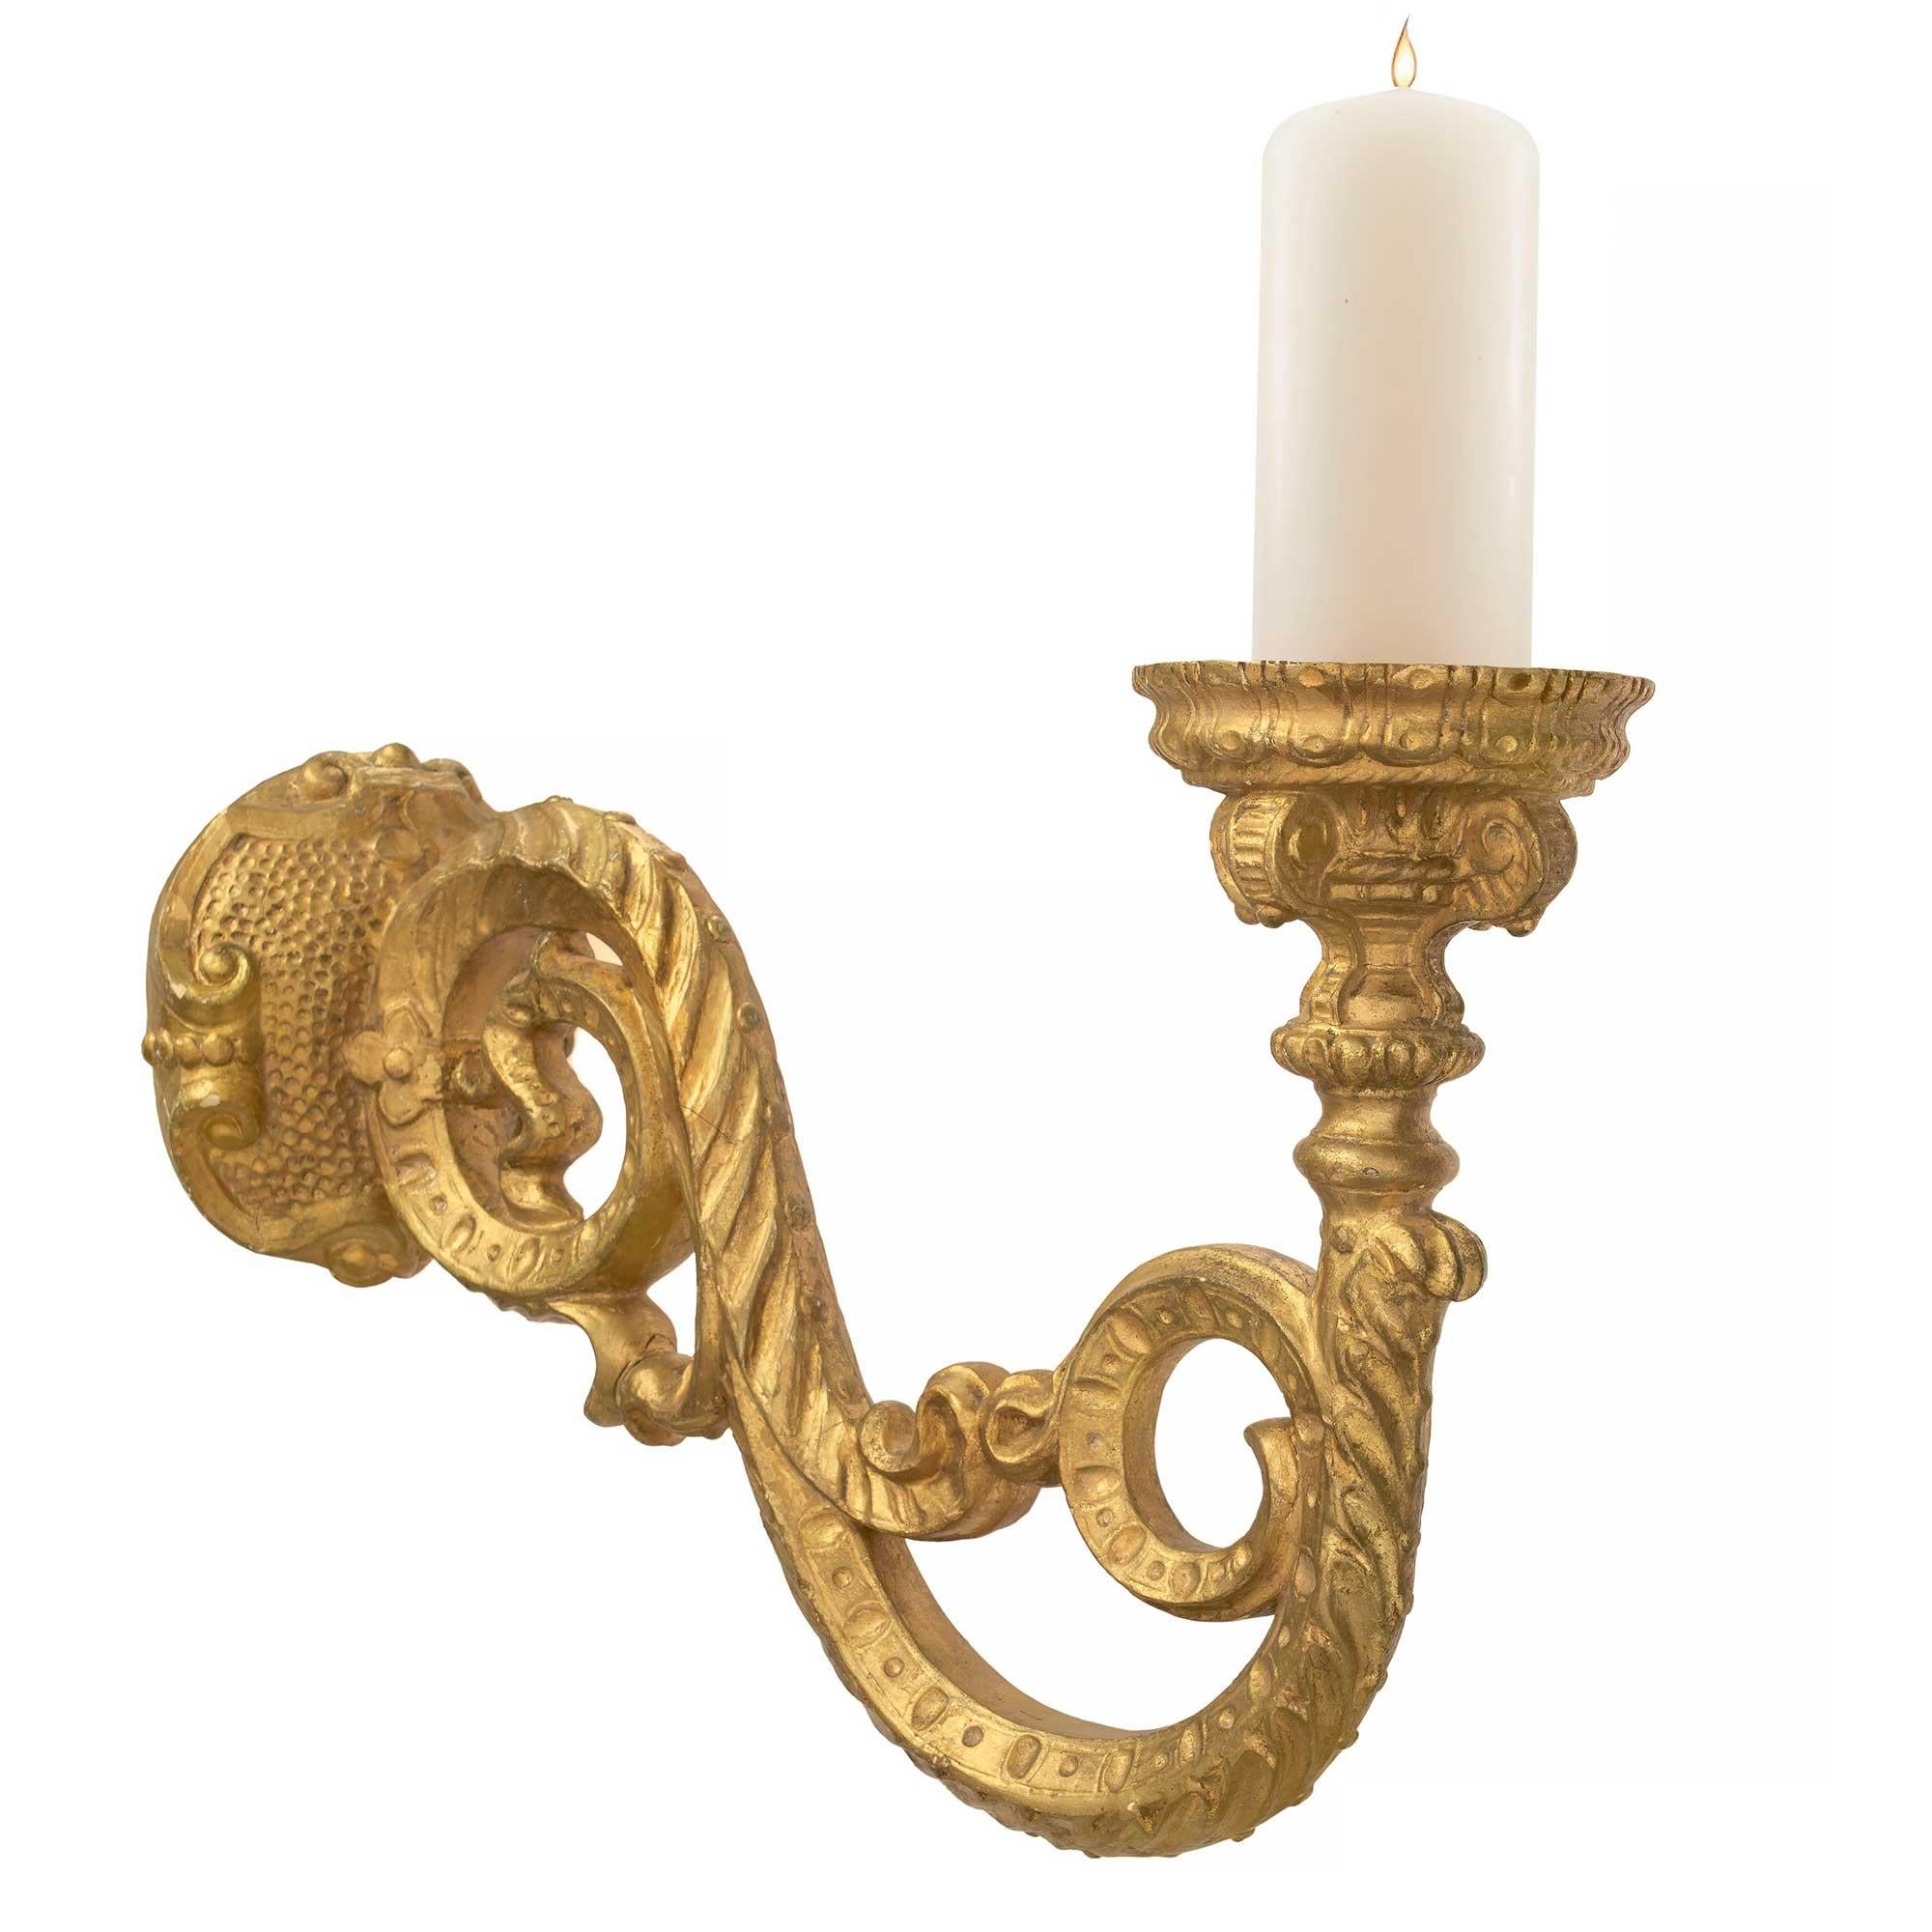 A striking and large scale set of three Italian 19th century Louis XIV style giltwood Bras de Lumière sconces. The sconces displays fine hammered back plates and an elegantly S-scrolled central arms, with richly carved foliate designs. Each arm